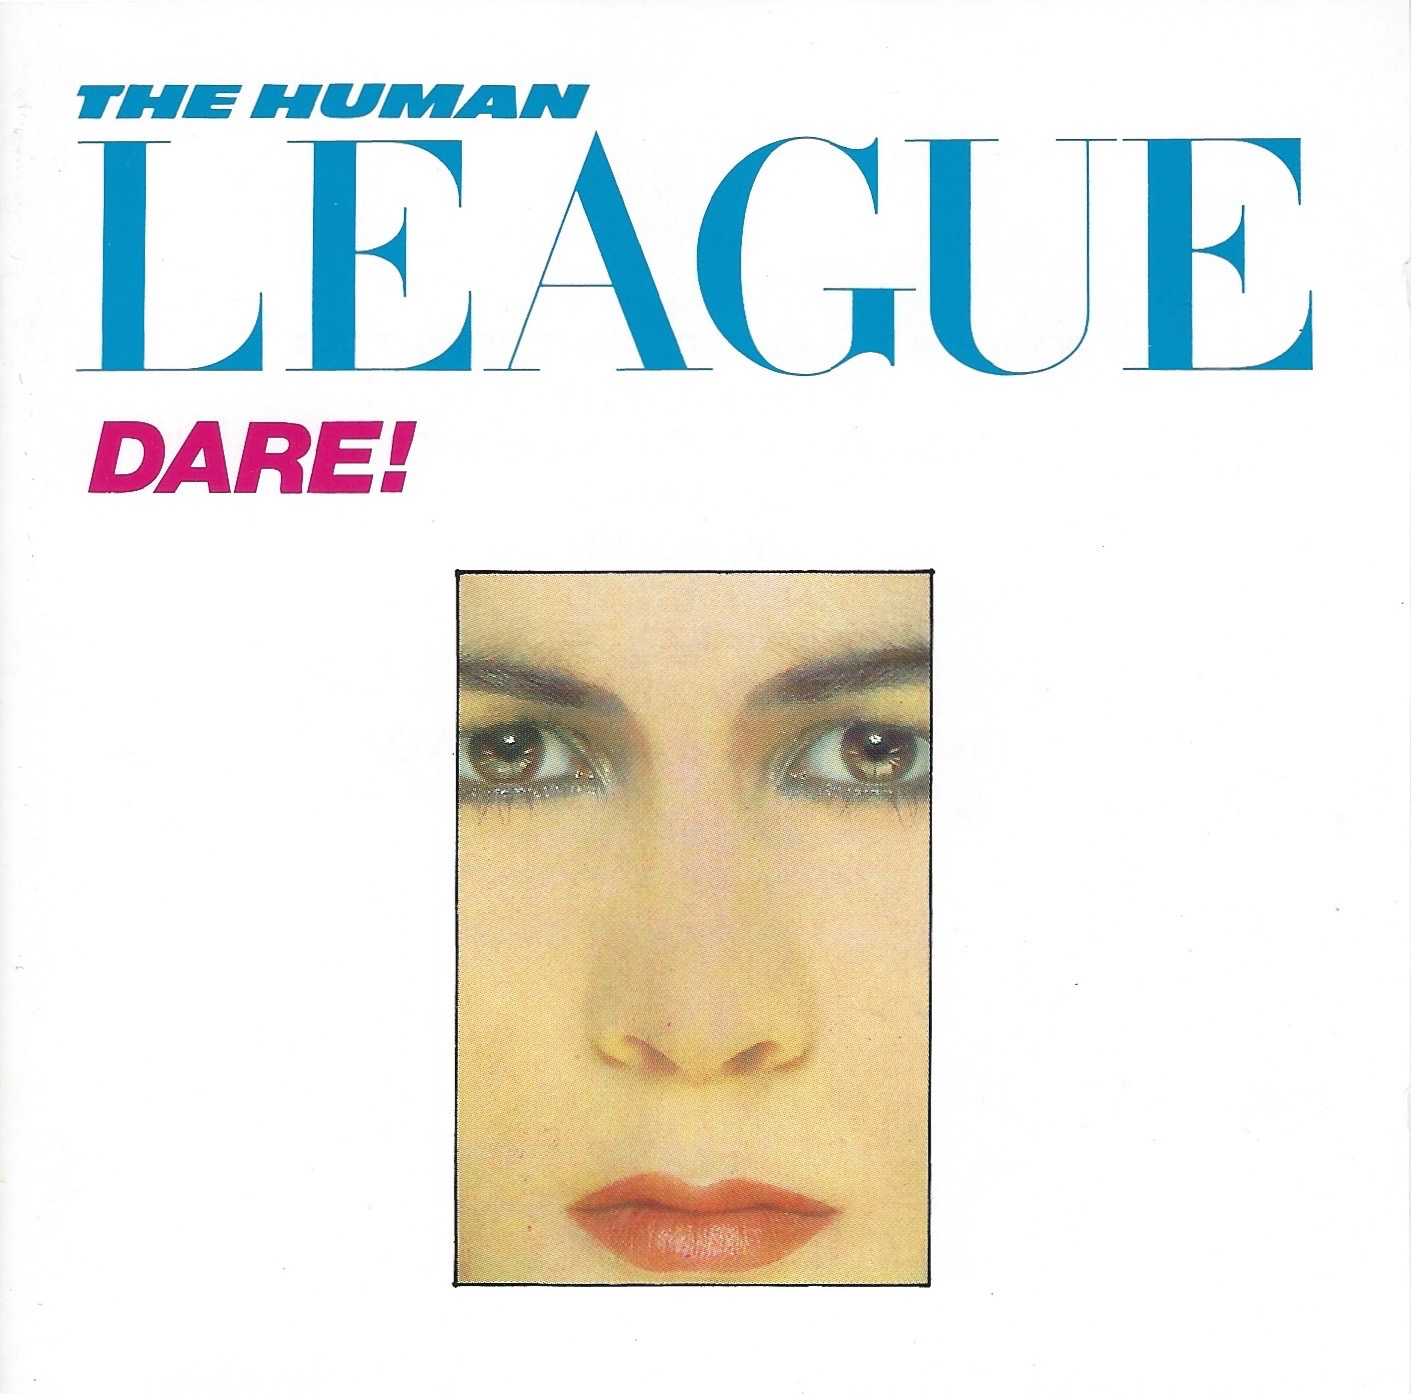 Art for The Human League - Don t You Want Me by The Human League